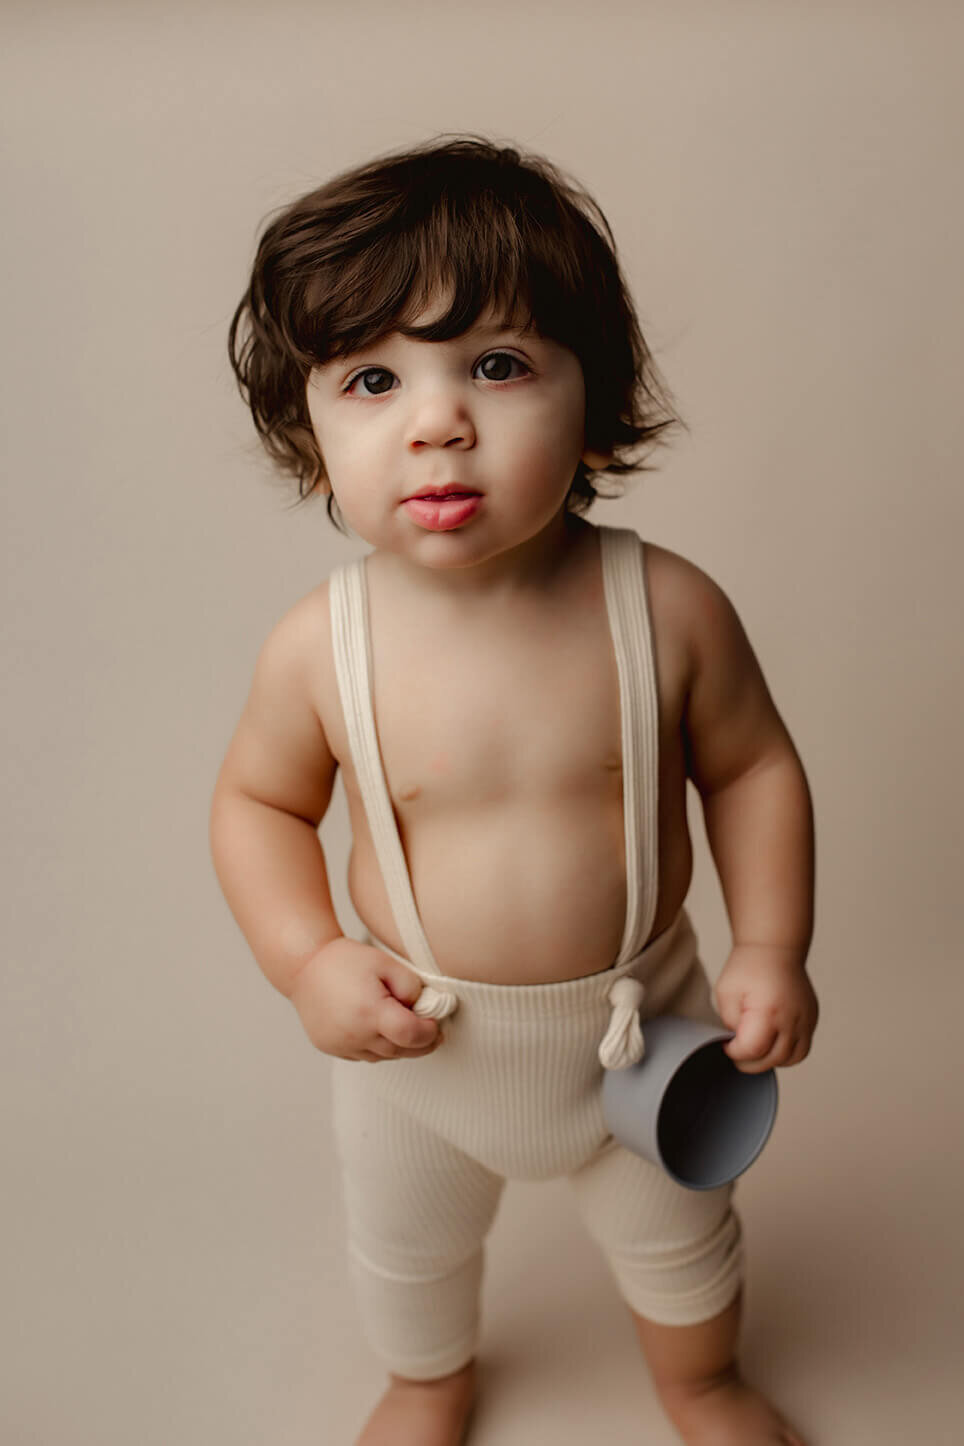 a 1 year old boy stands on a white backdrop with white suspenders on